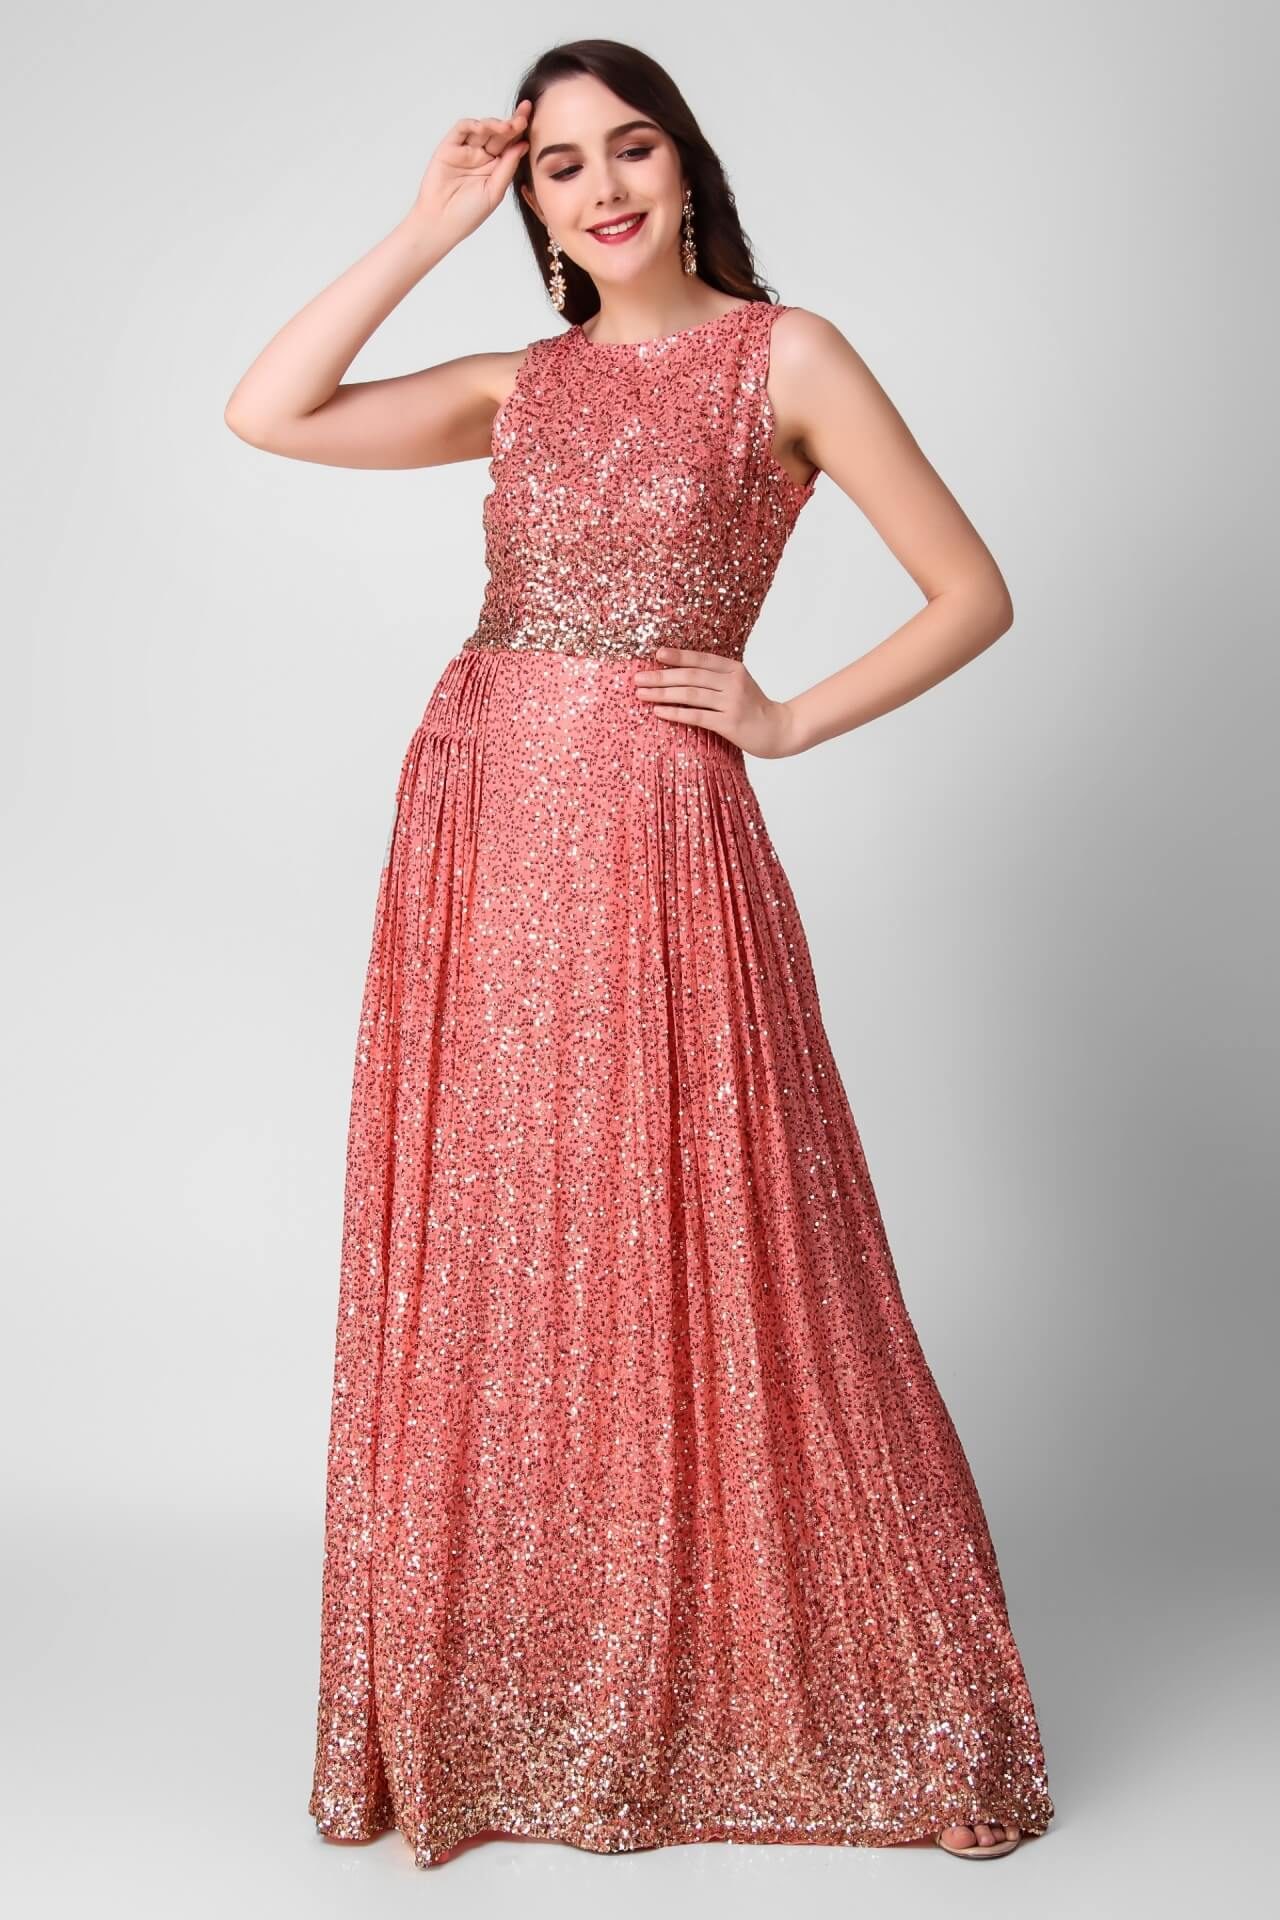 Peach Sequins Stylish Gown